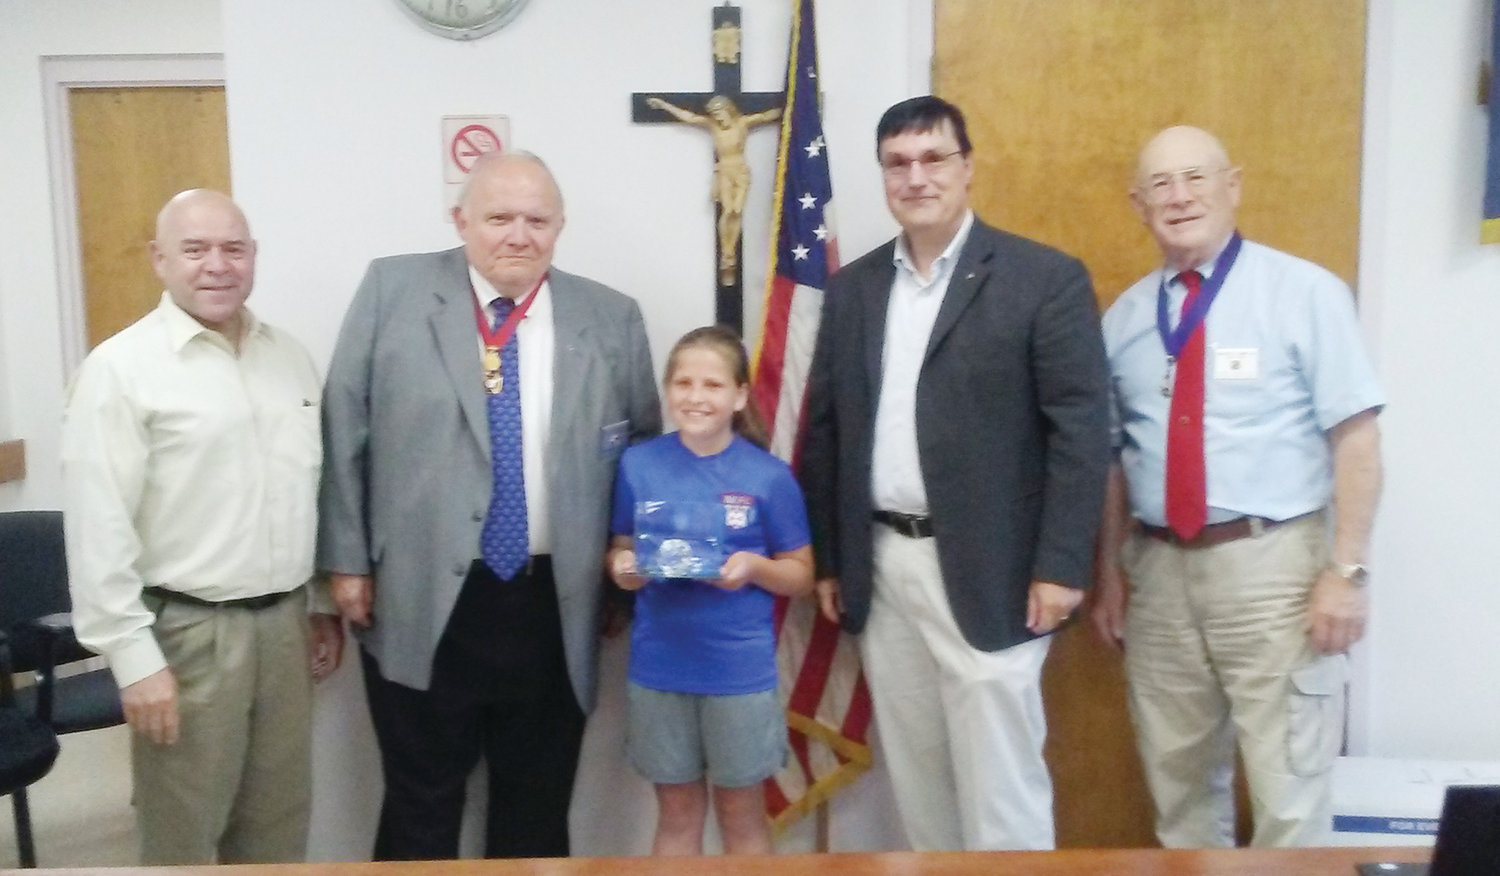 Knights award local soccer star: Mia Hanson, 12, of Bristol has been named an International Champion of the 2018-2019 International Soccer Challenge sponsored by the Knights of Columbus. Hanson was sponsored by Council 379. Her precision penalty shooting placed her in the top one percentile of almost 8,000 participants in the council, district, regional and state levels of competition. Pictured from left, Tony Teixeira, Council 379 soccer coordinator; Michael Dziok, R.I. State Deputy Grand Knight; Hanson, Michael Guerrero state youth soccer director and Walter Smith Council 379 Grand Knight.